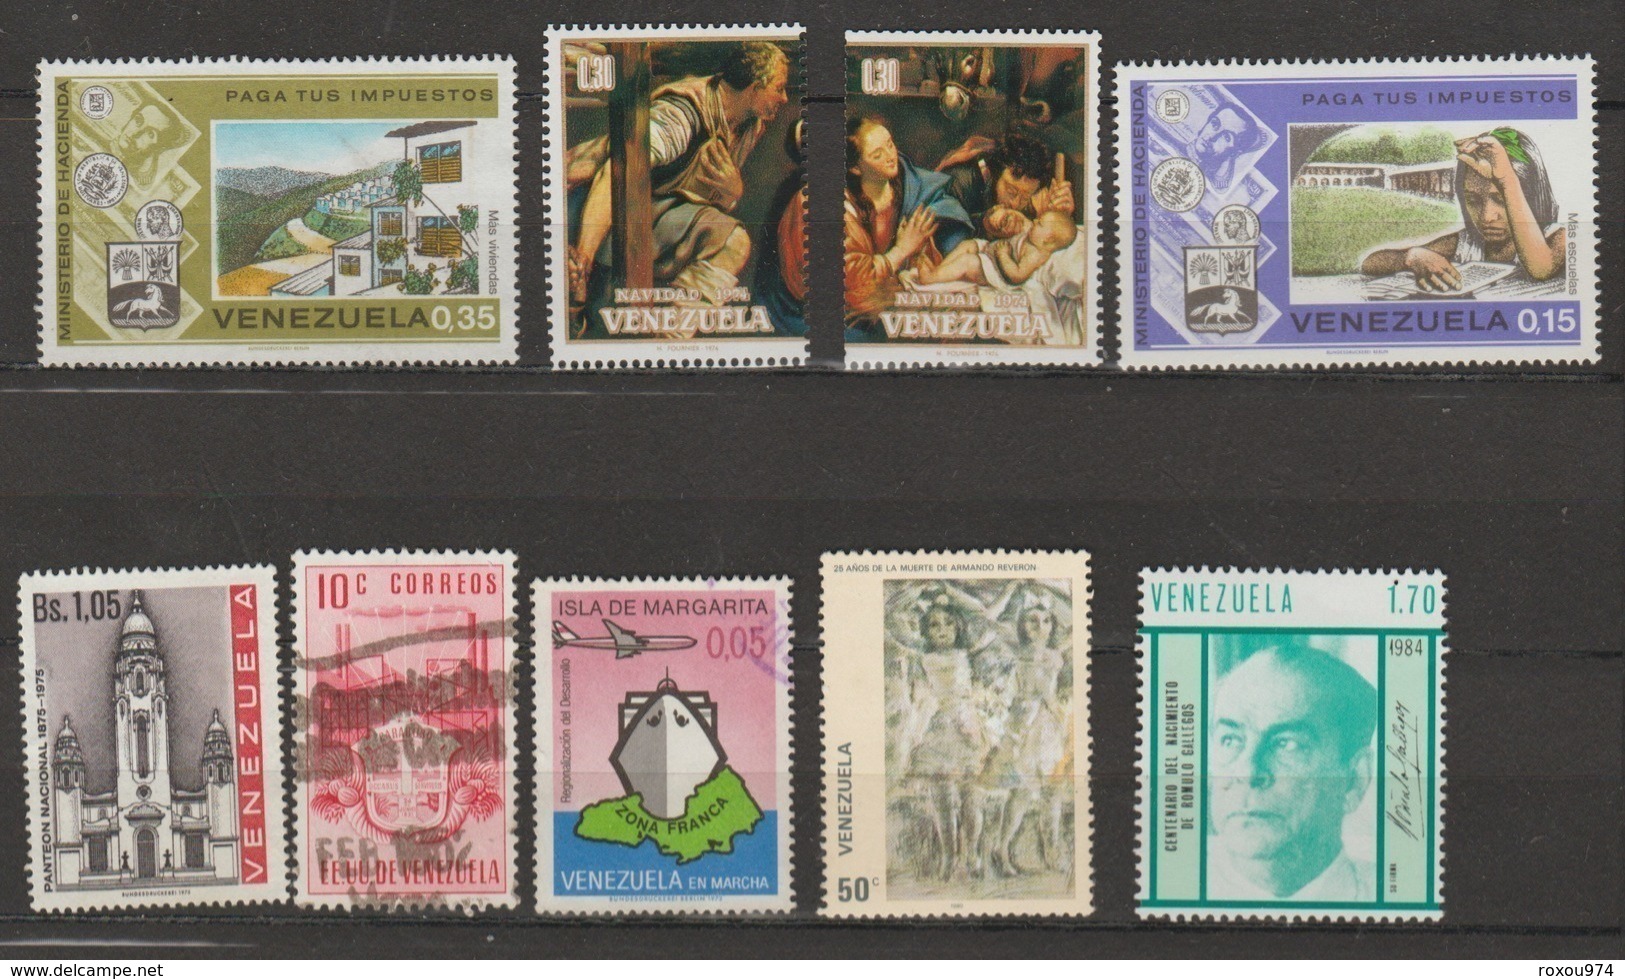 LOT TIMBRES MONDE  1114 OBLITERES +  112 NEUFS**      46 SCAN